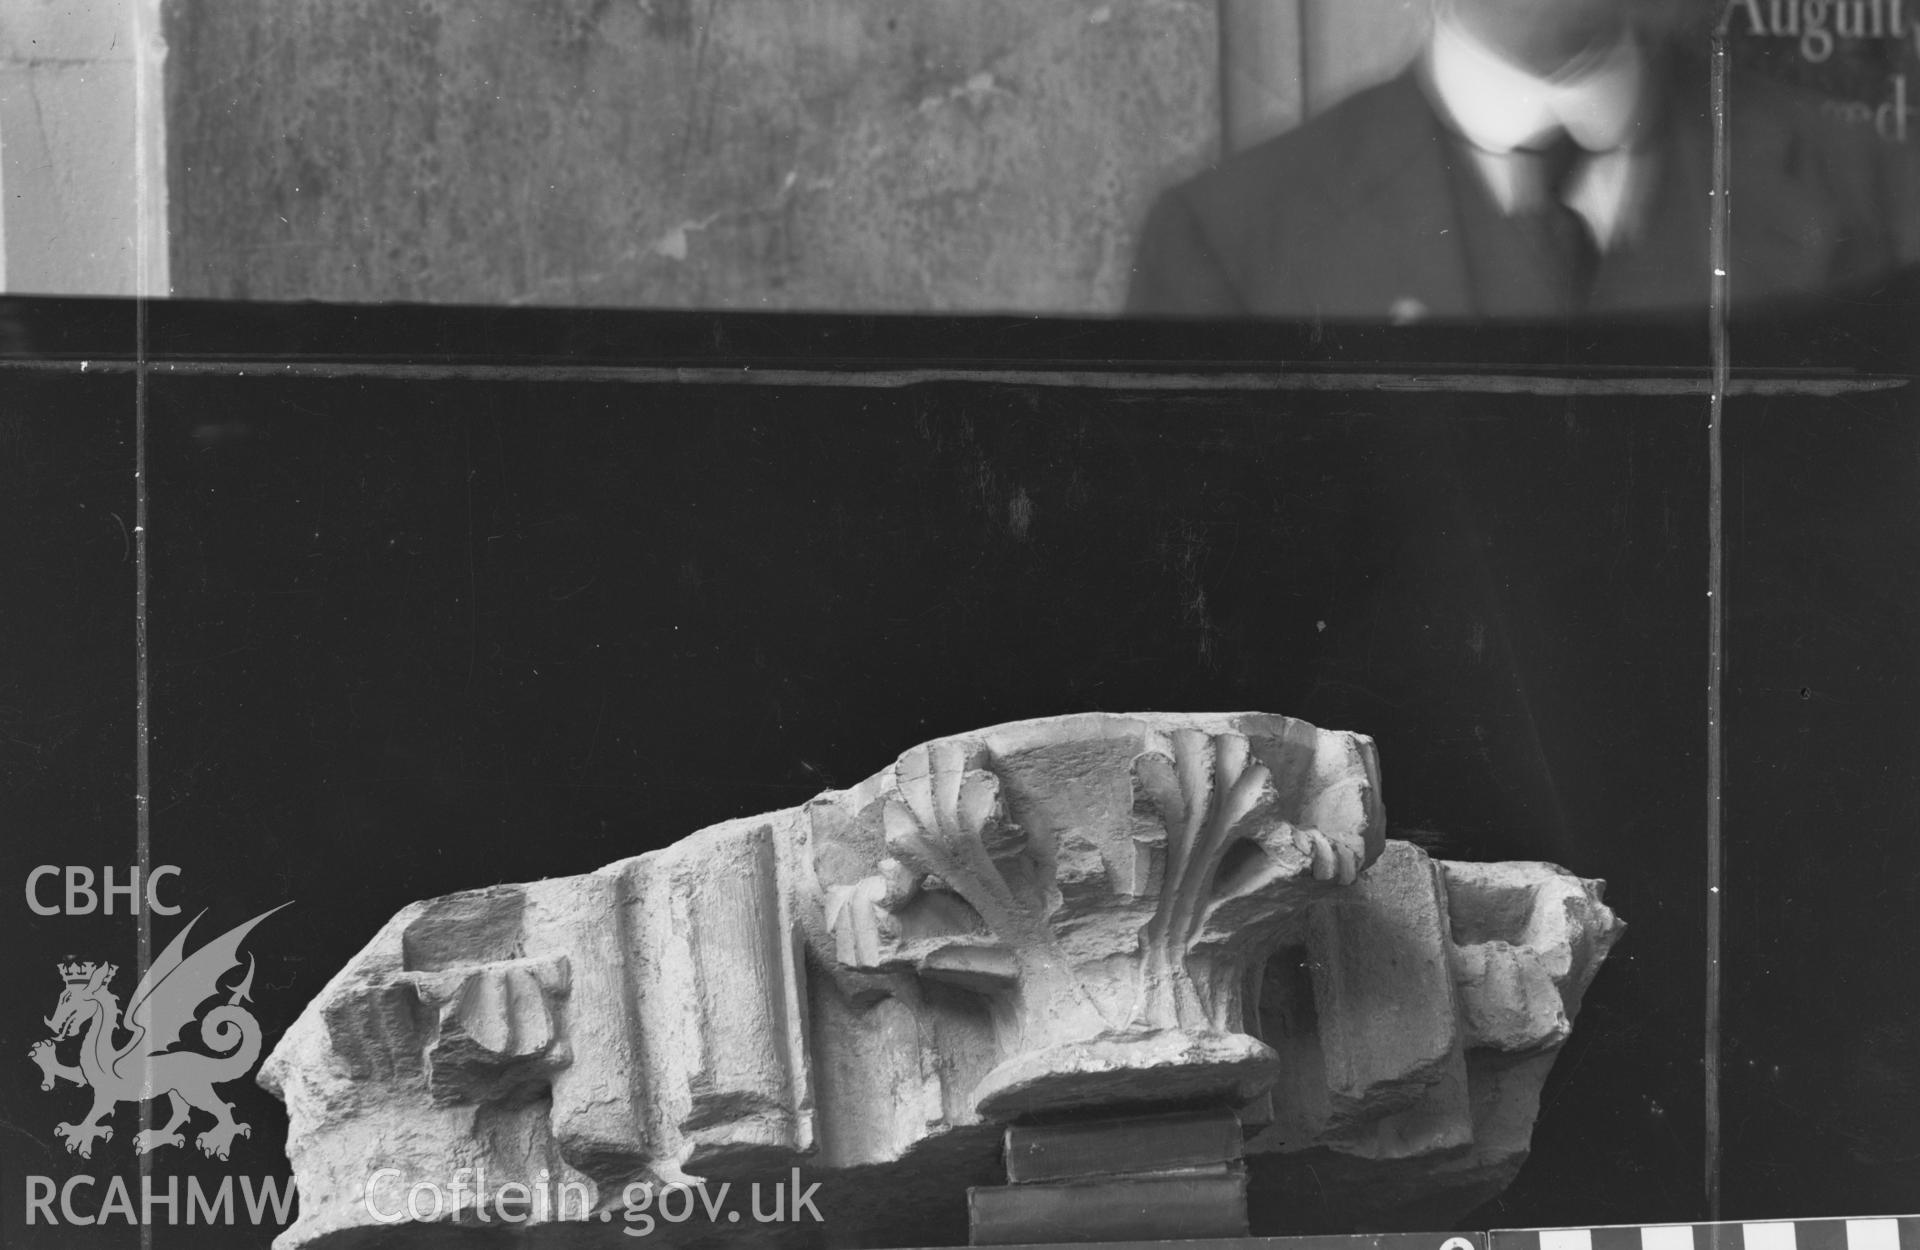 Digital copy of a black and white nitrate negative showing detail of capital section at St. David's Cathedral, taken by E.W. Lovegrove, July 1936.